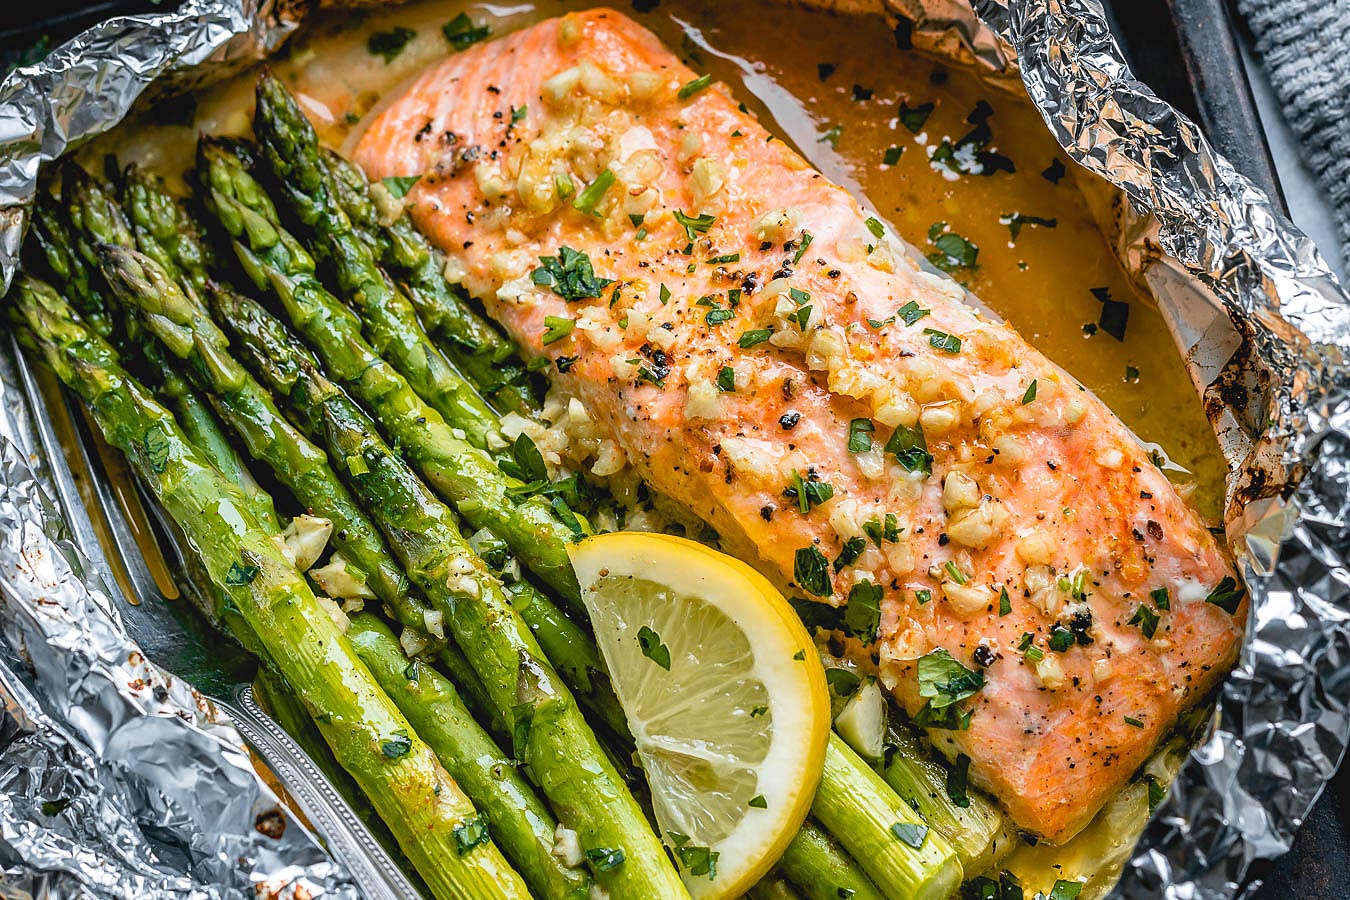 Baked Salmon in Foil with Asparagus and Garlic Lemon Butter Sauce - #recipe by #eatwell101